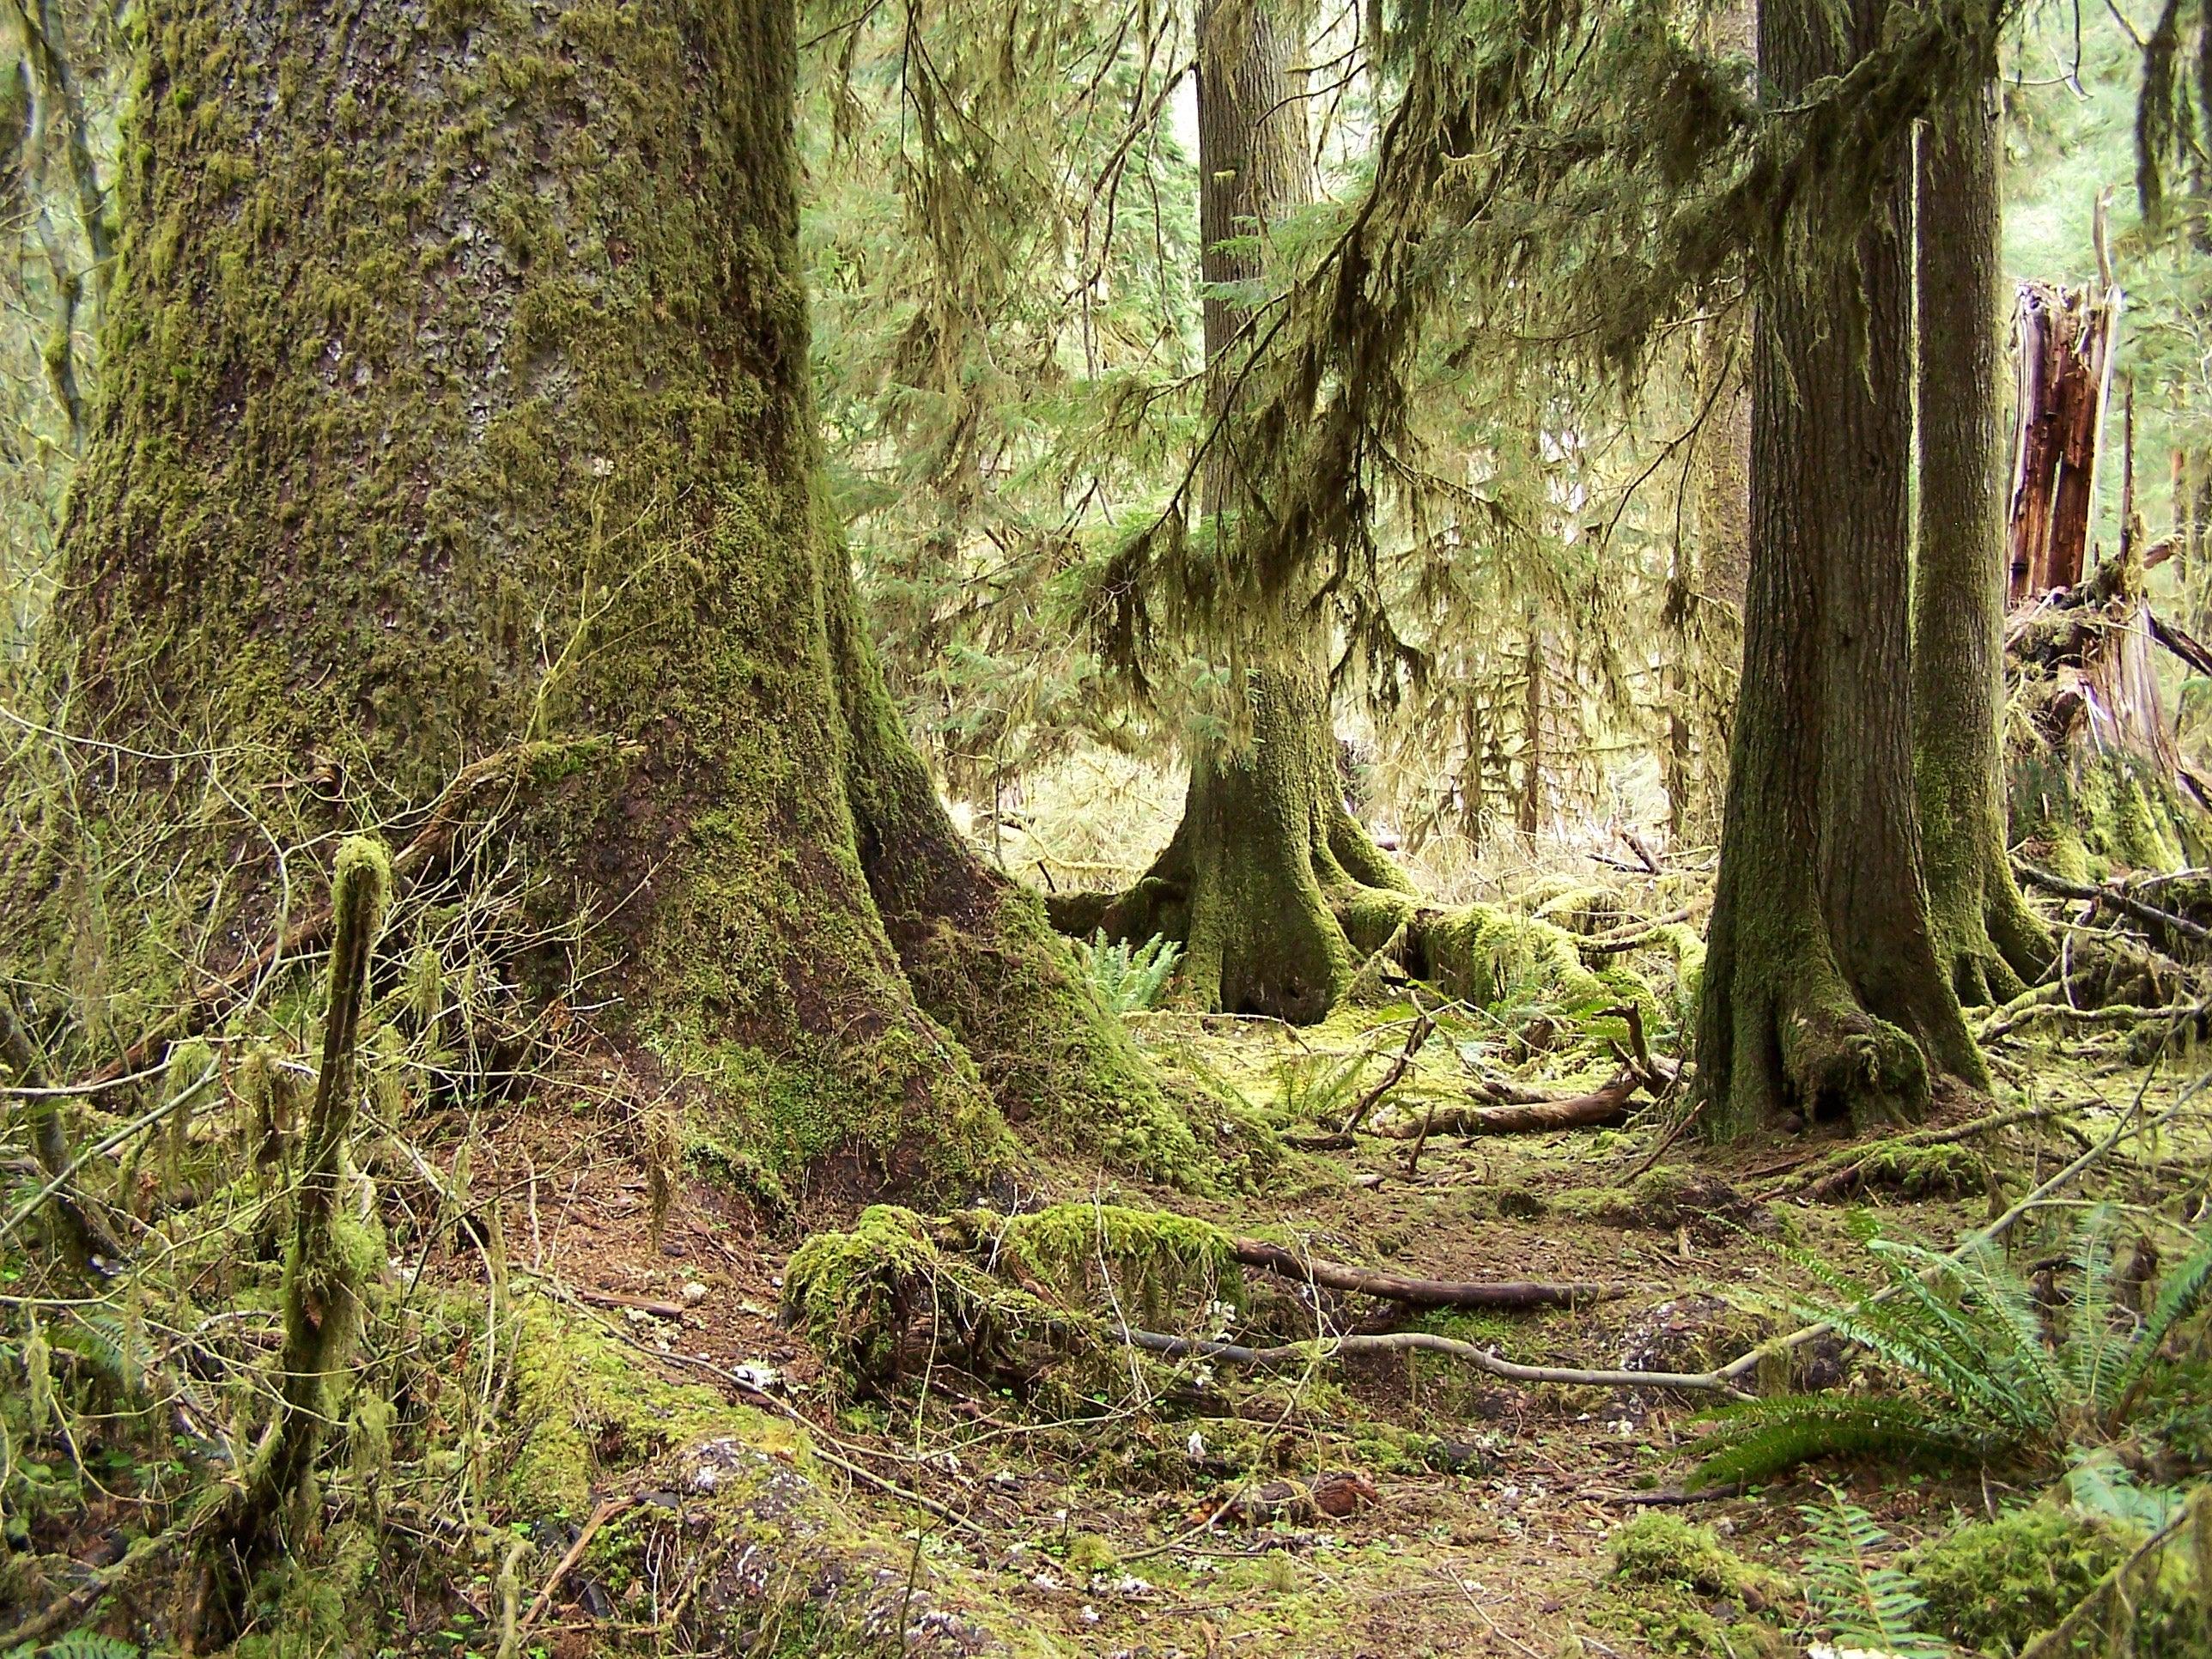 Olympic National Rain Forest, the only rain forest in the continental United States